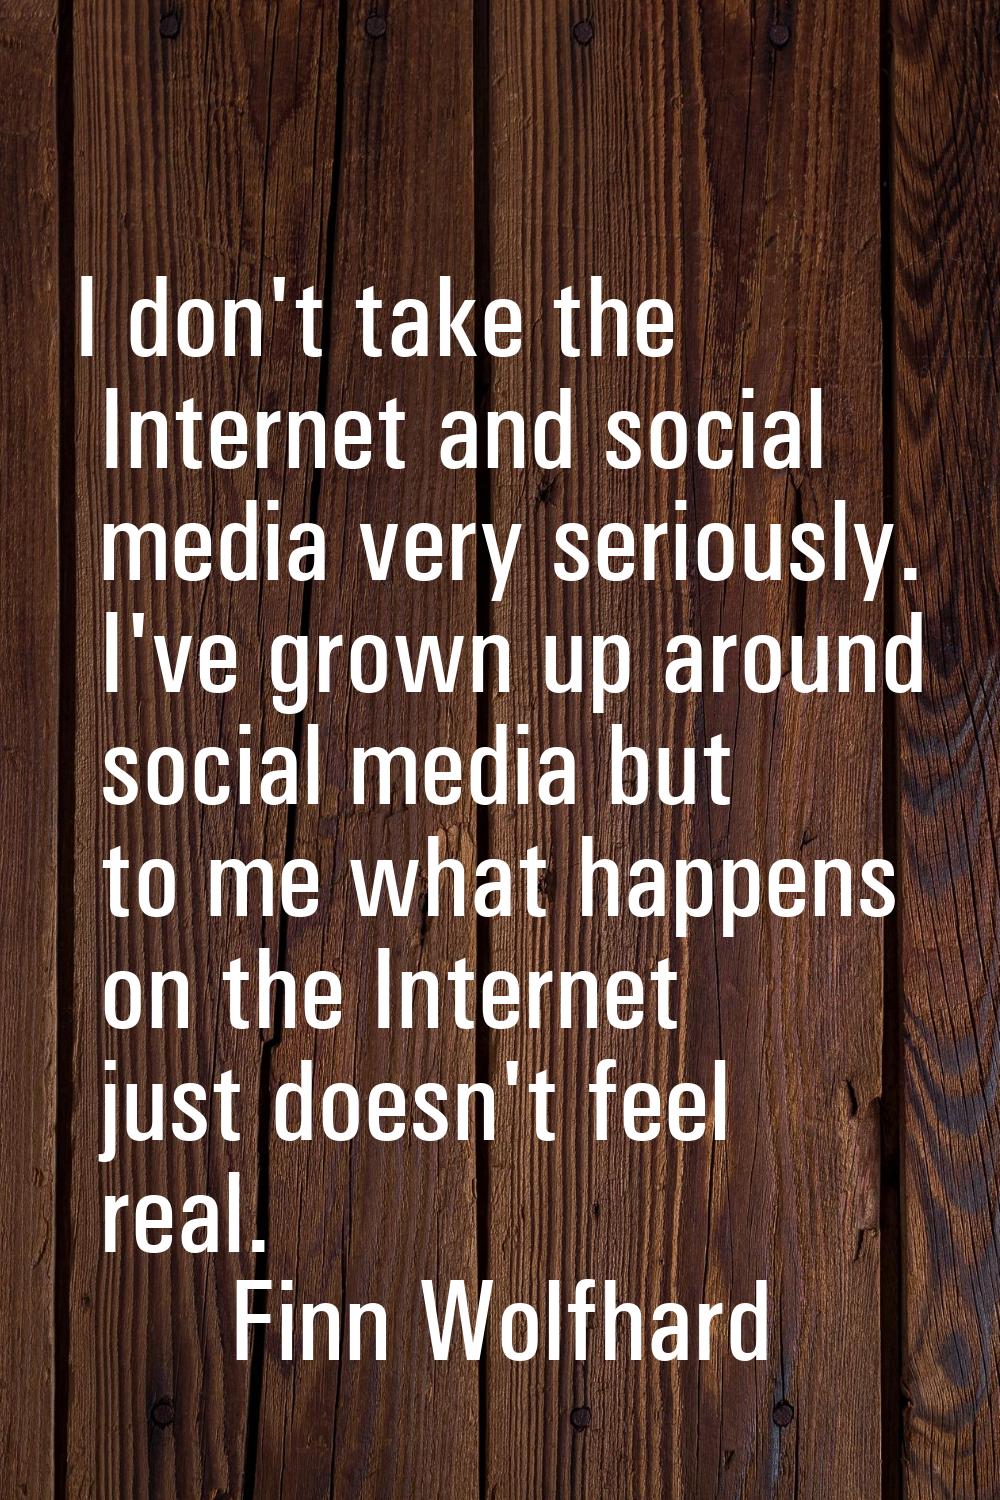 I don't take the Internet and social media very seriously. I've grown up around social media but to